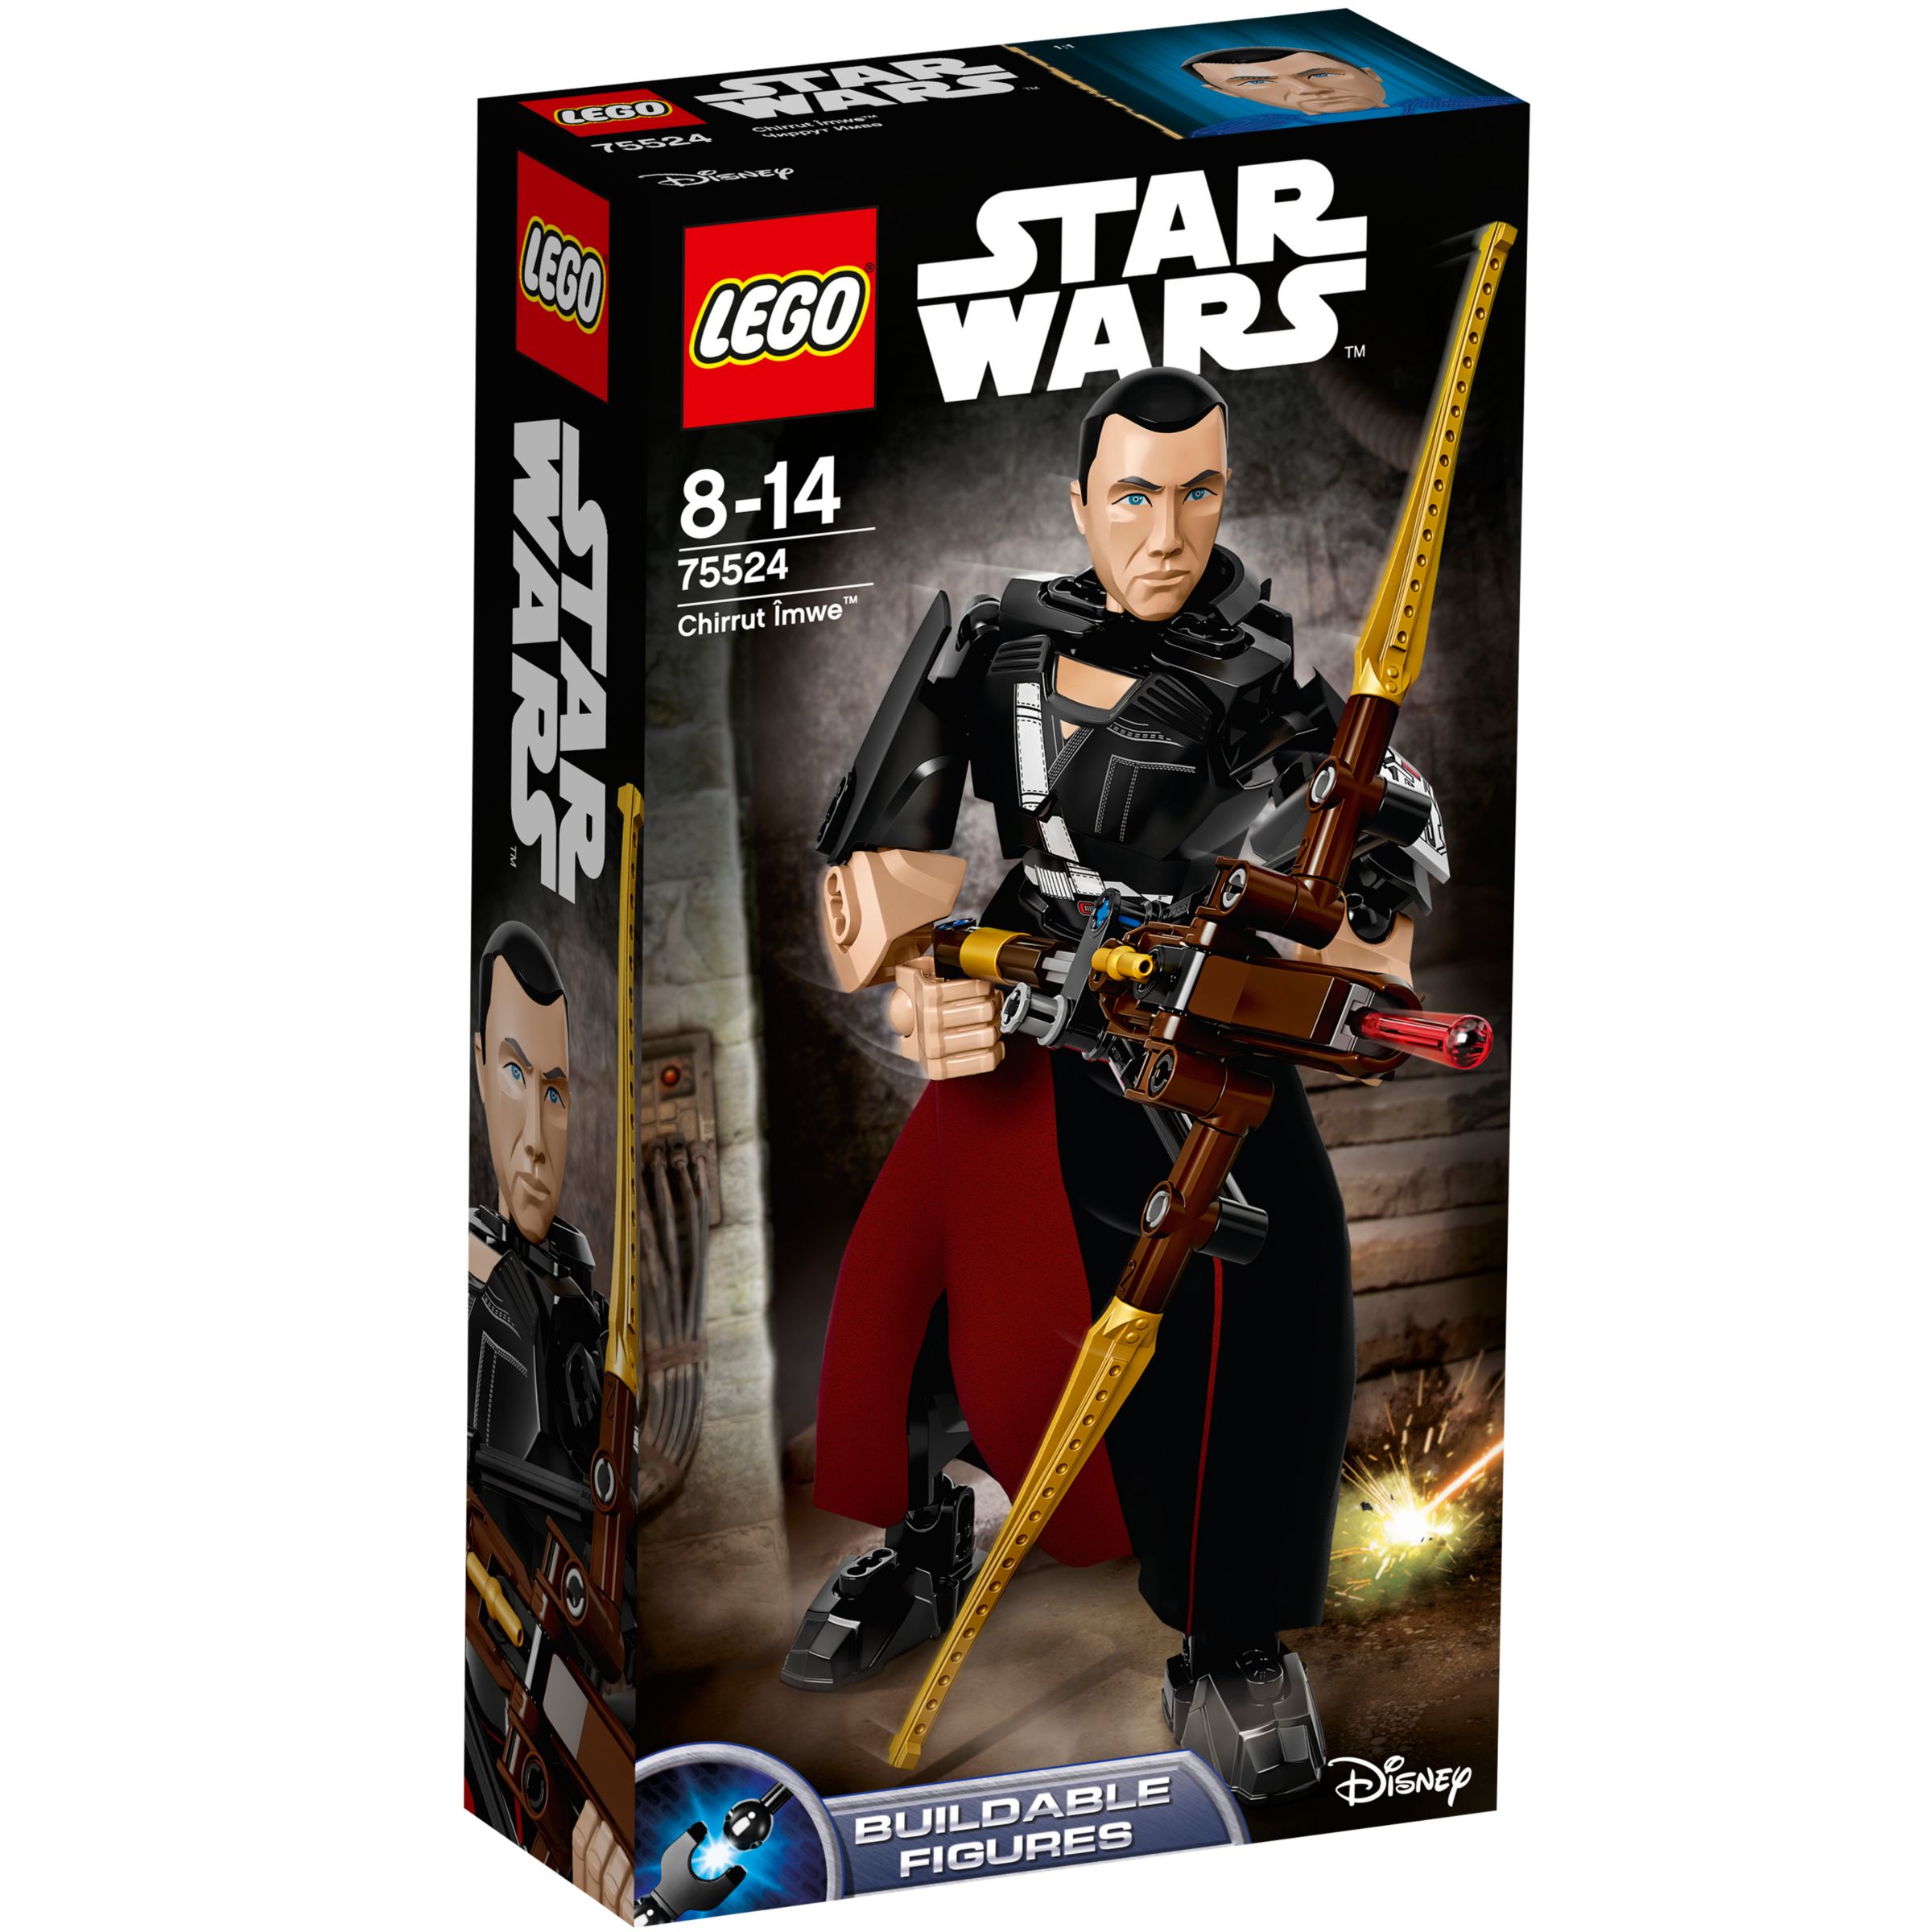 LEGO Star Wars 75524 Chirrut Imwe Buildable Action Figure